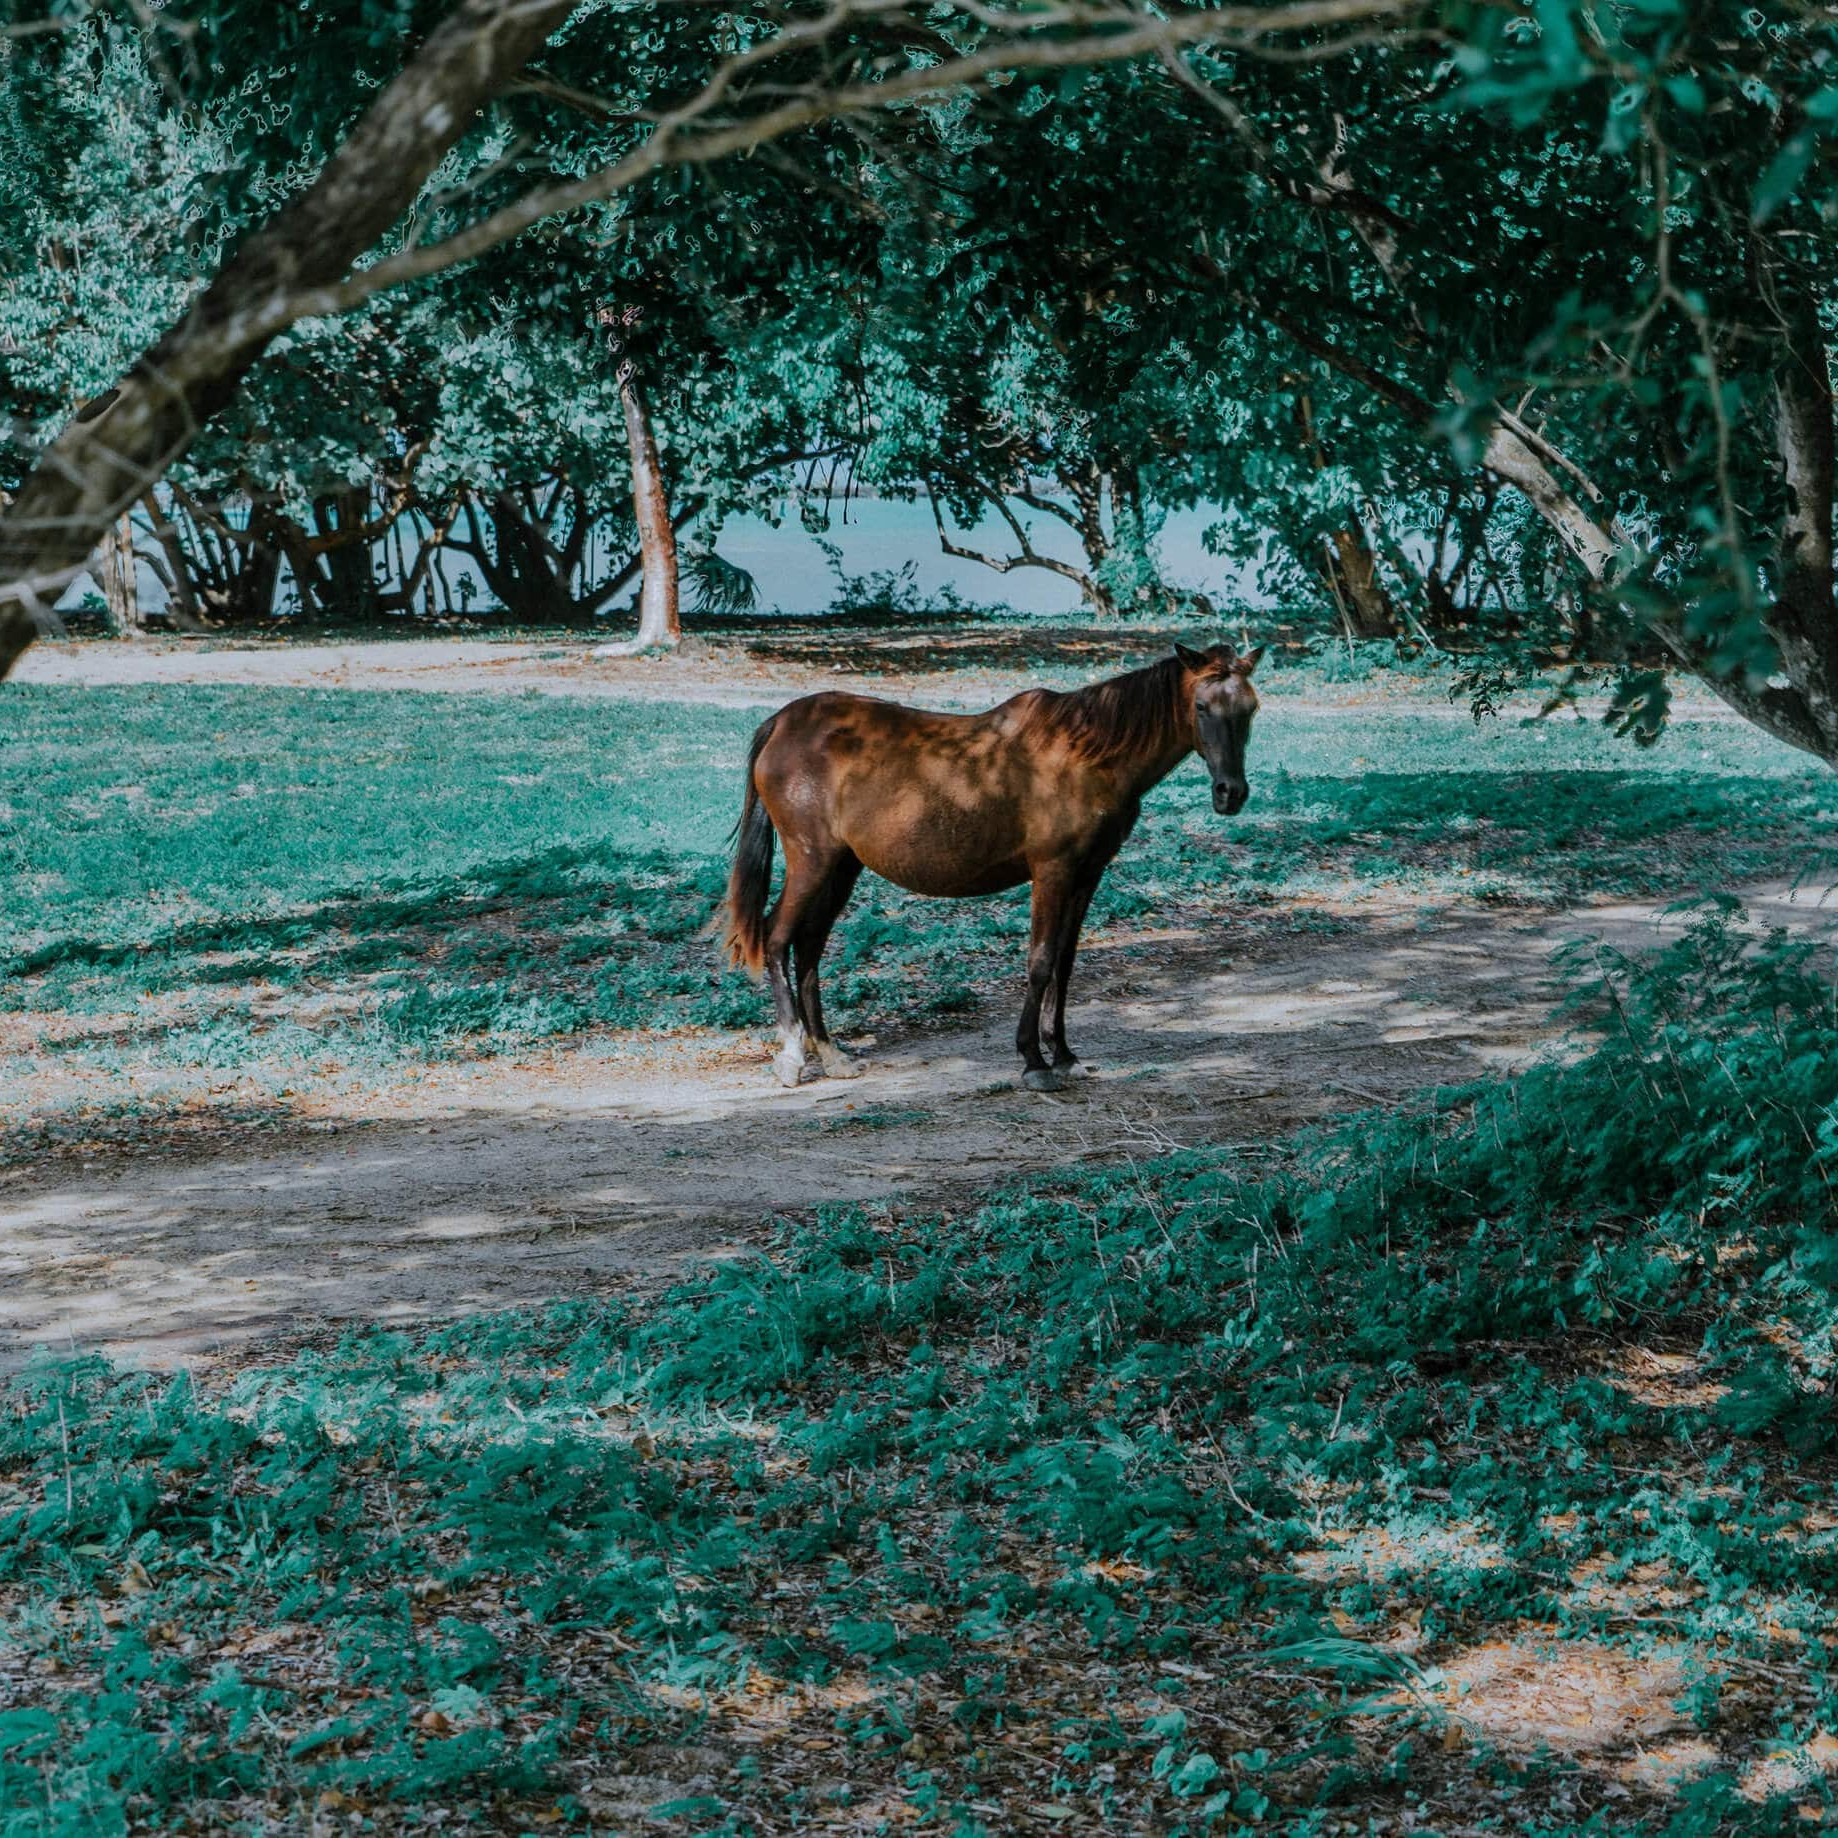 Photograph of a wild horse in Vieques, Puerto Rico.